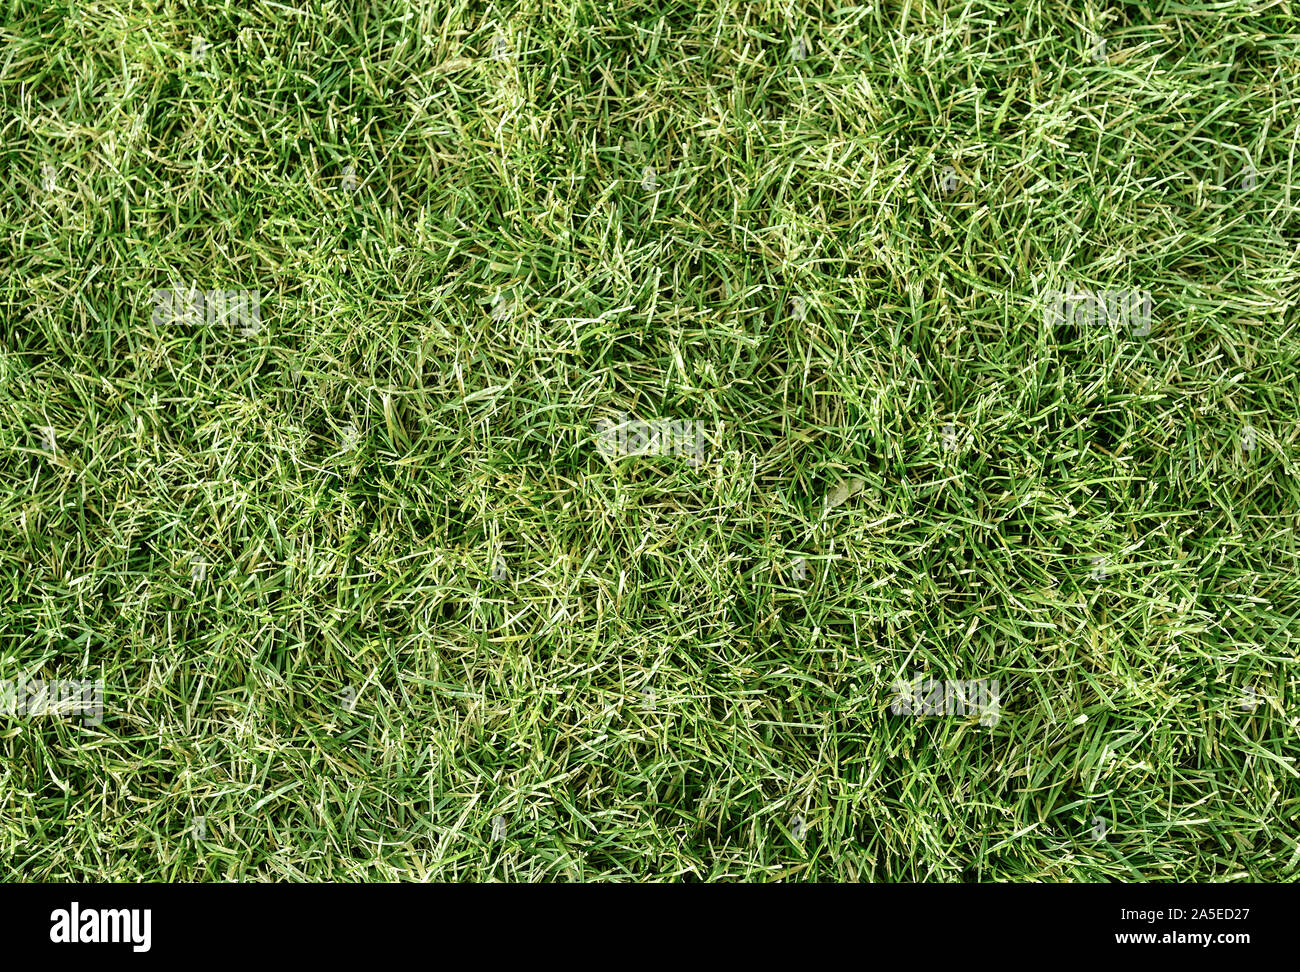 Top view of natural Green Grass background Stock Photo